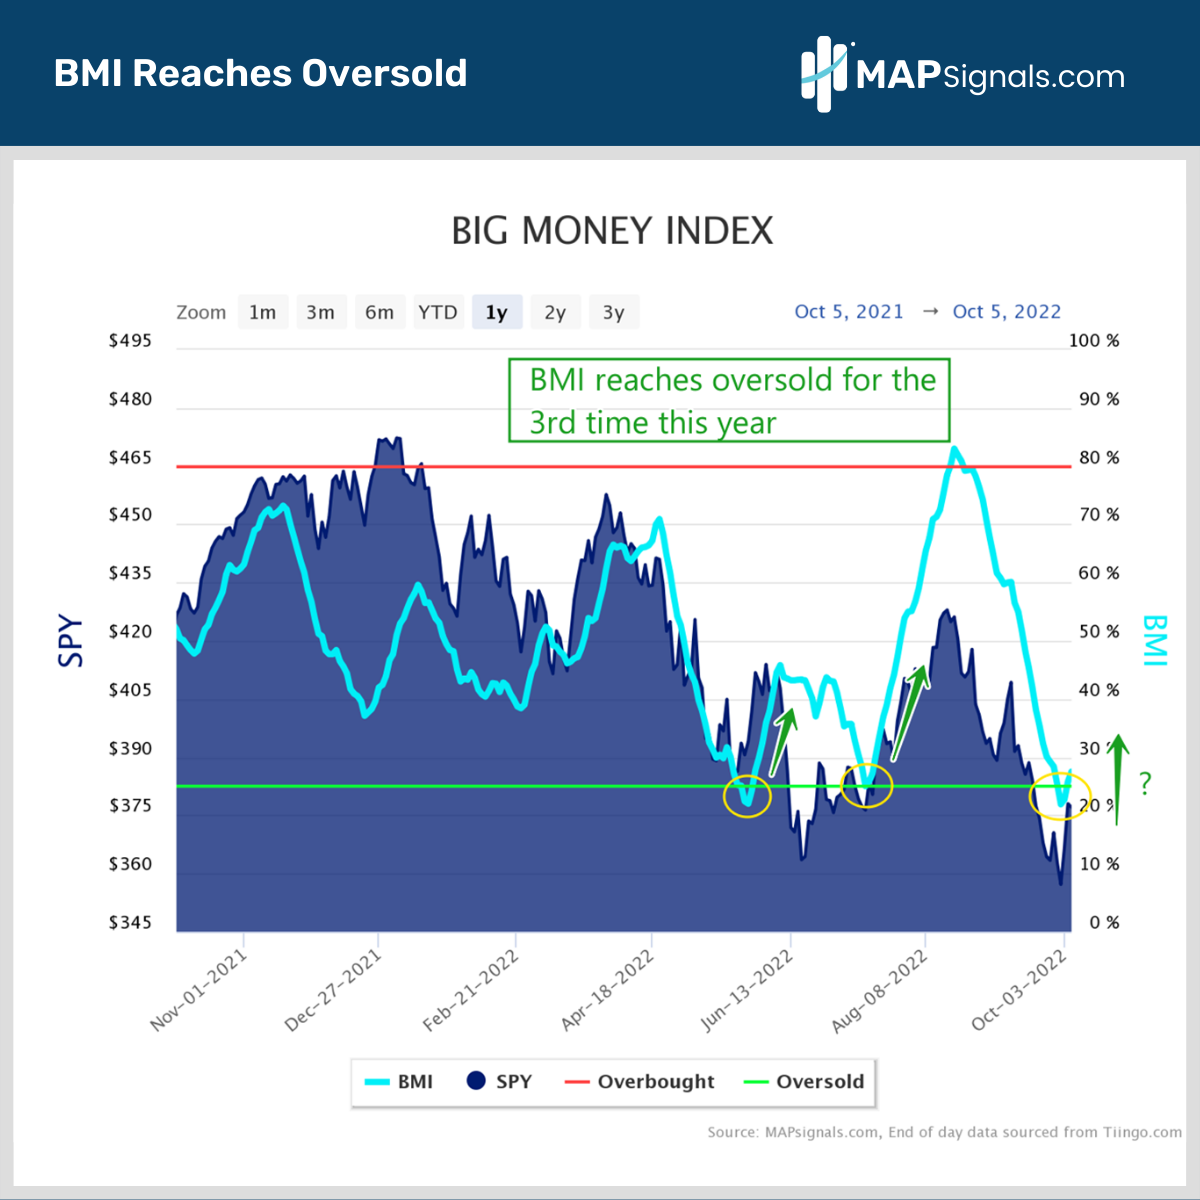 BMI Reaches Oversold 3rd time this year | Big Money Index